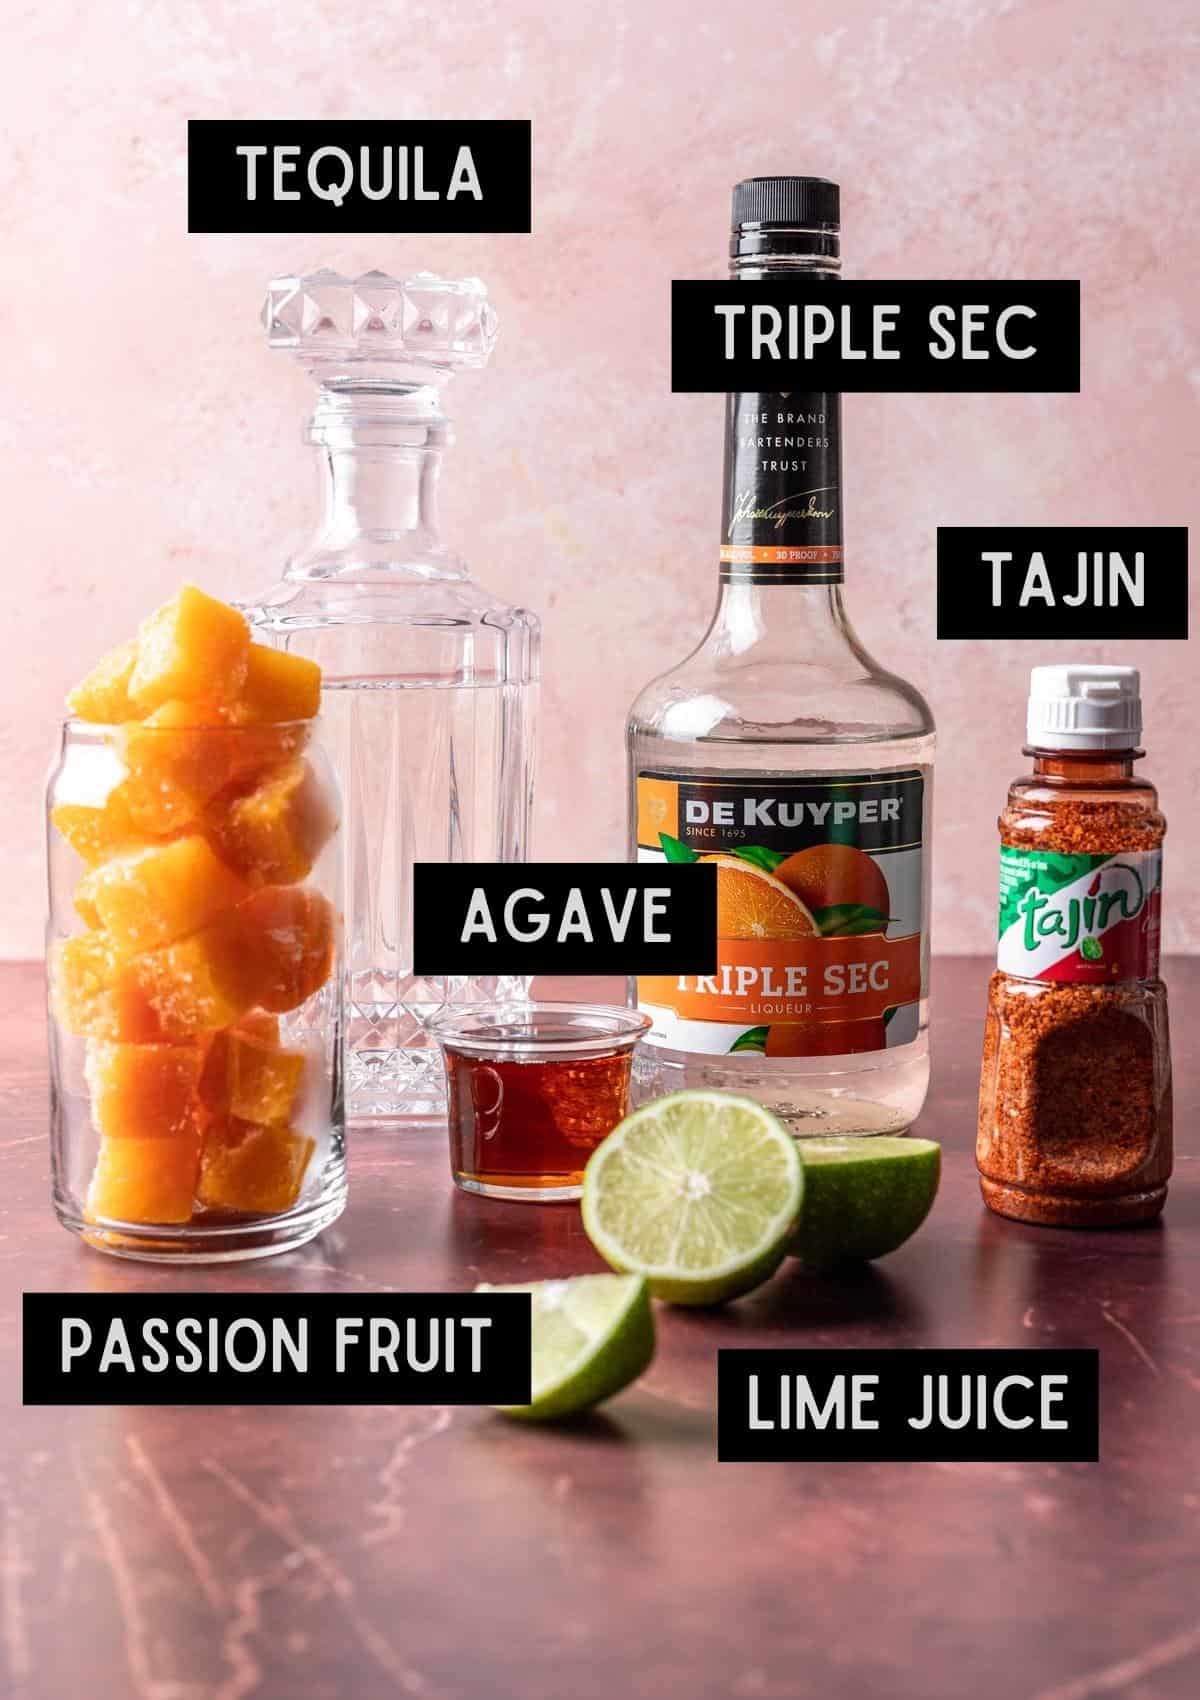 Labelled ingredients for passion fruit margaritas (see recipe for details).